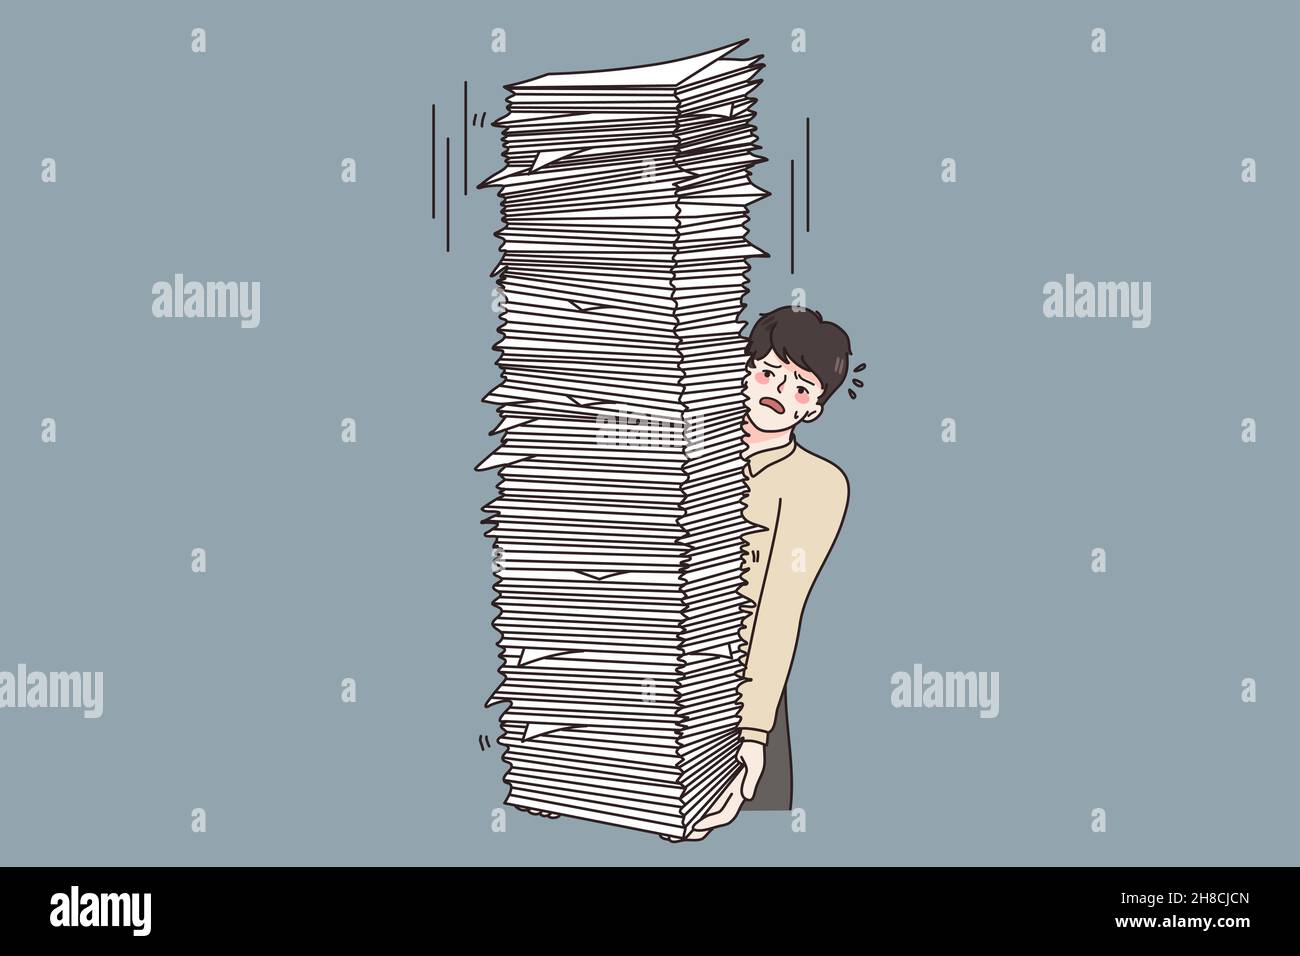 Overwork and pressure at work concept. Young stressed man worker carrying huge stack heap of papers documents feeling tired vector illustration  Stock Vector